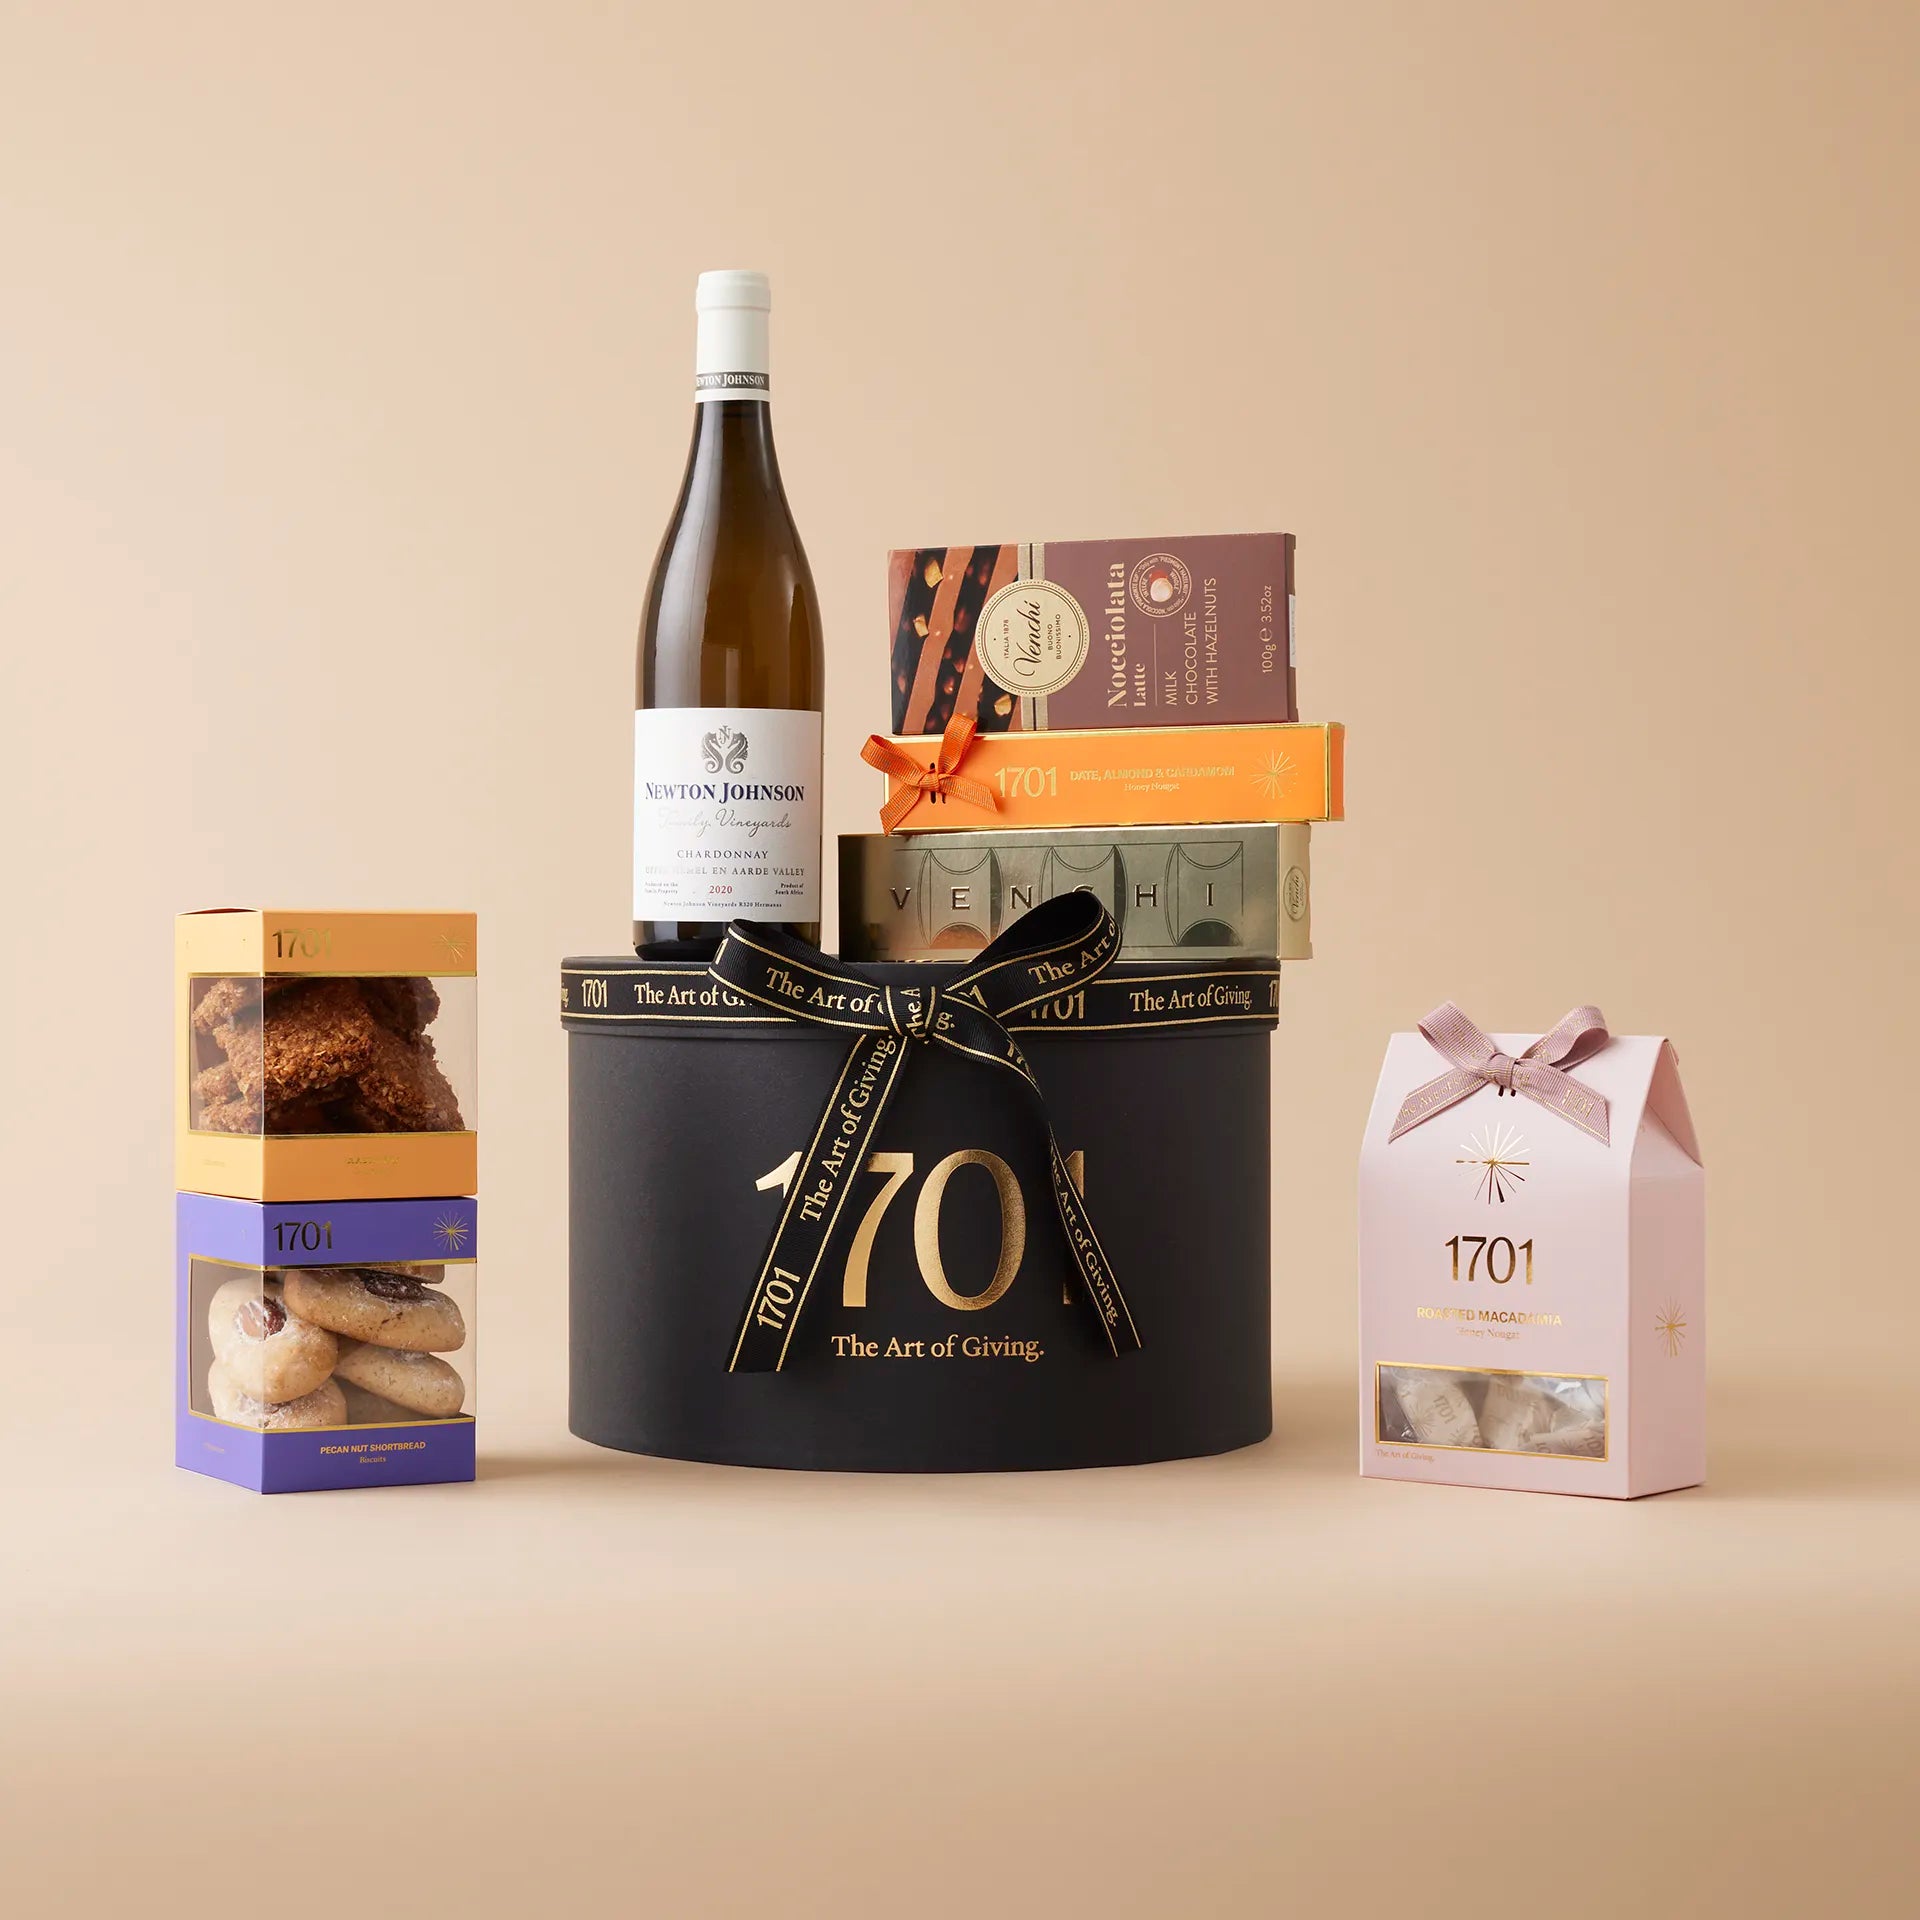 A gift box containing a bottle of Newton Johnson Family Vineyards 2020 Chardonnay, a box of handcrafted honey nougat, a nougat bar, two boxes of biscuits, and two imported Italian chocolates by Venchi. The box is decorated with a ribbon and placed on a wooden table with a warm background.